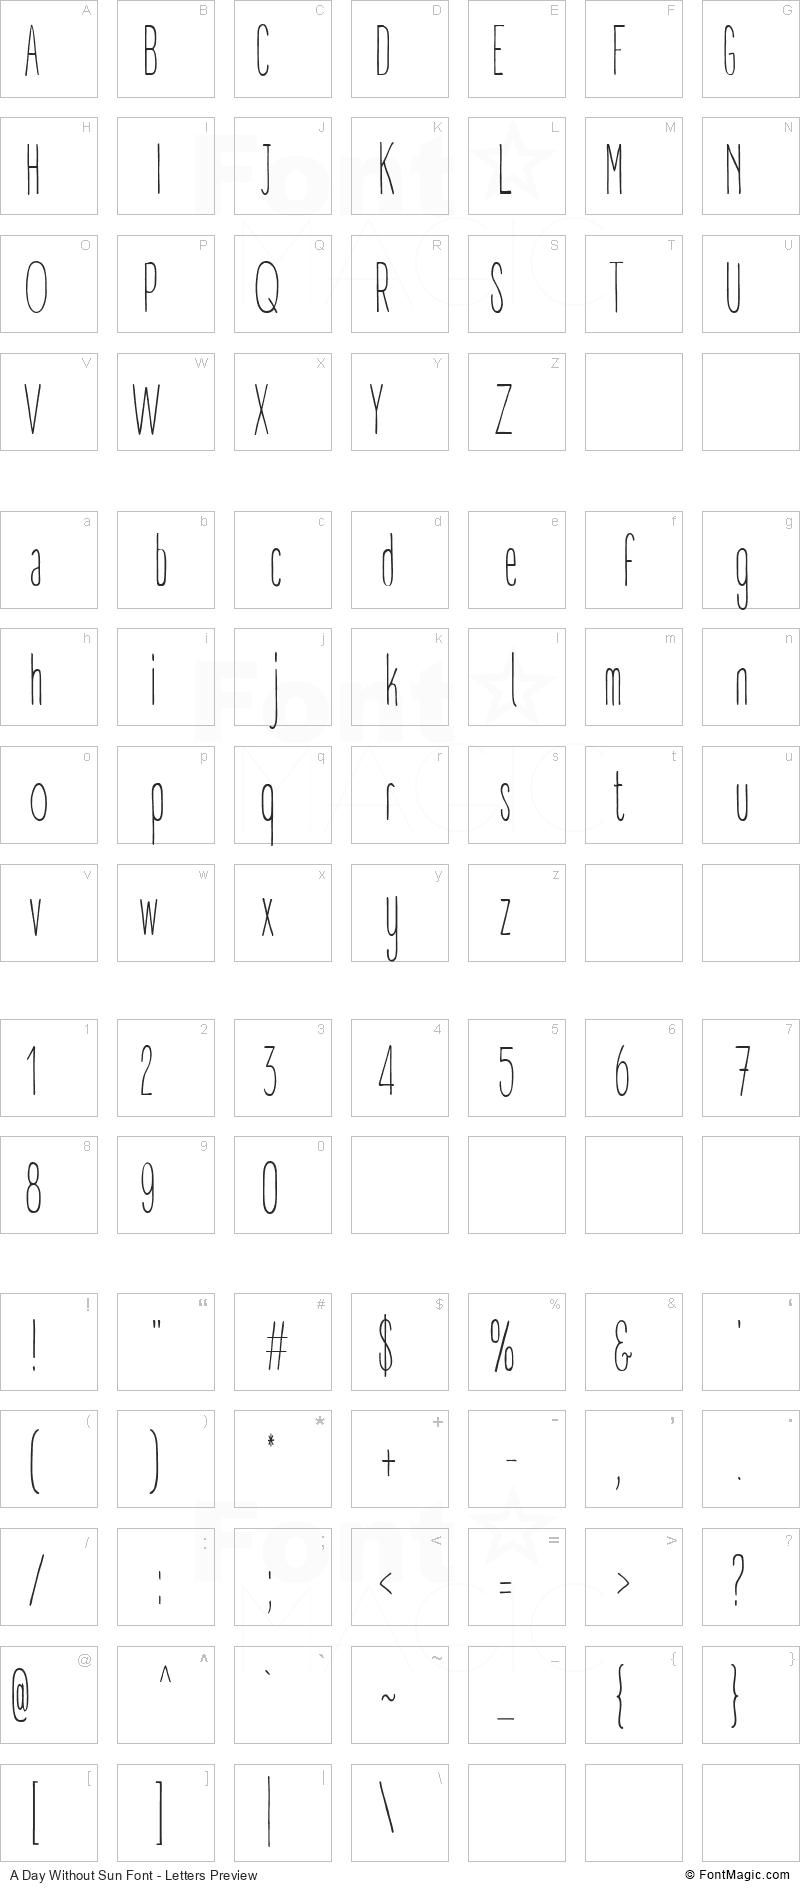 A Day Without Sun Font - All Latters Preview Chart